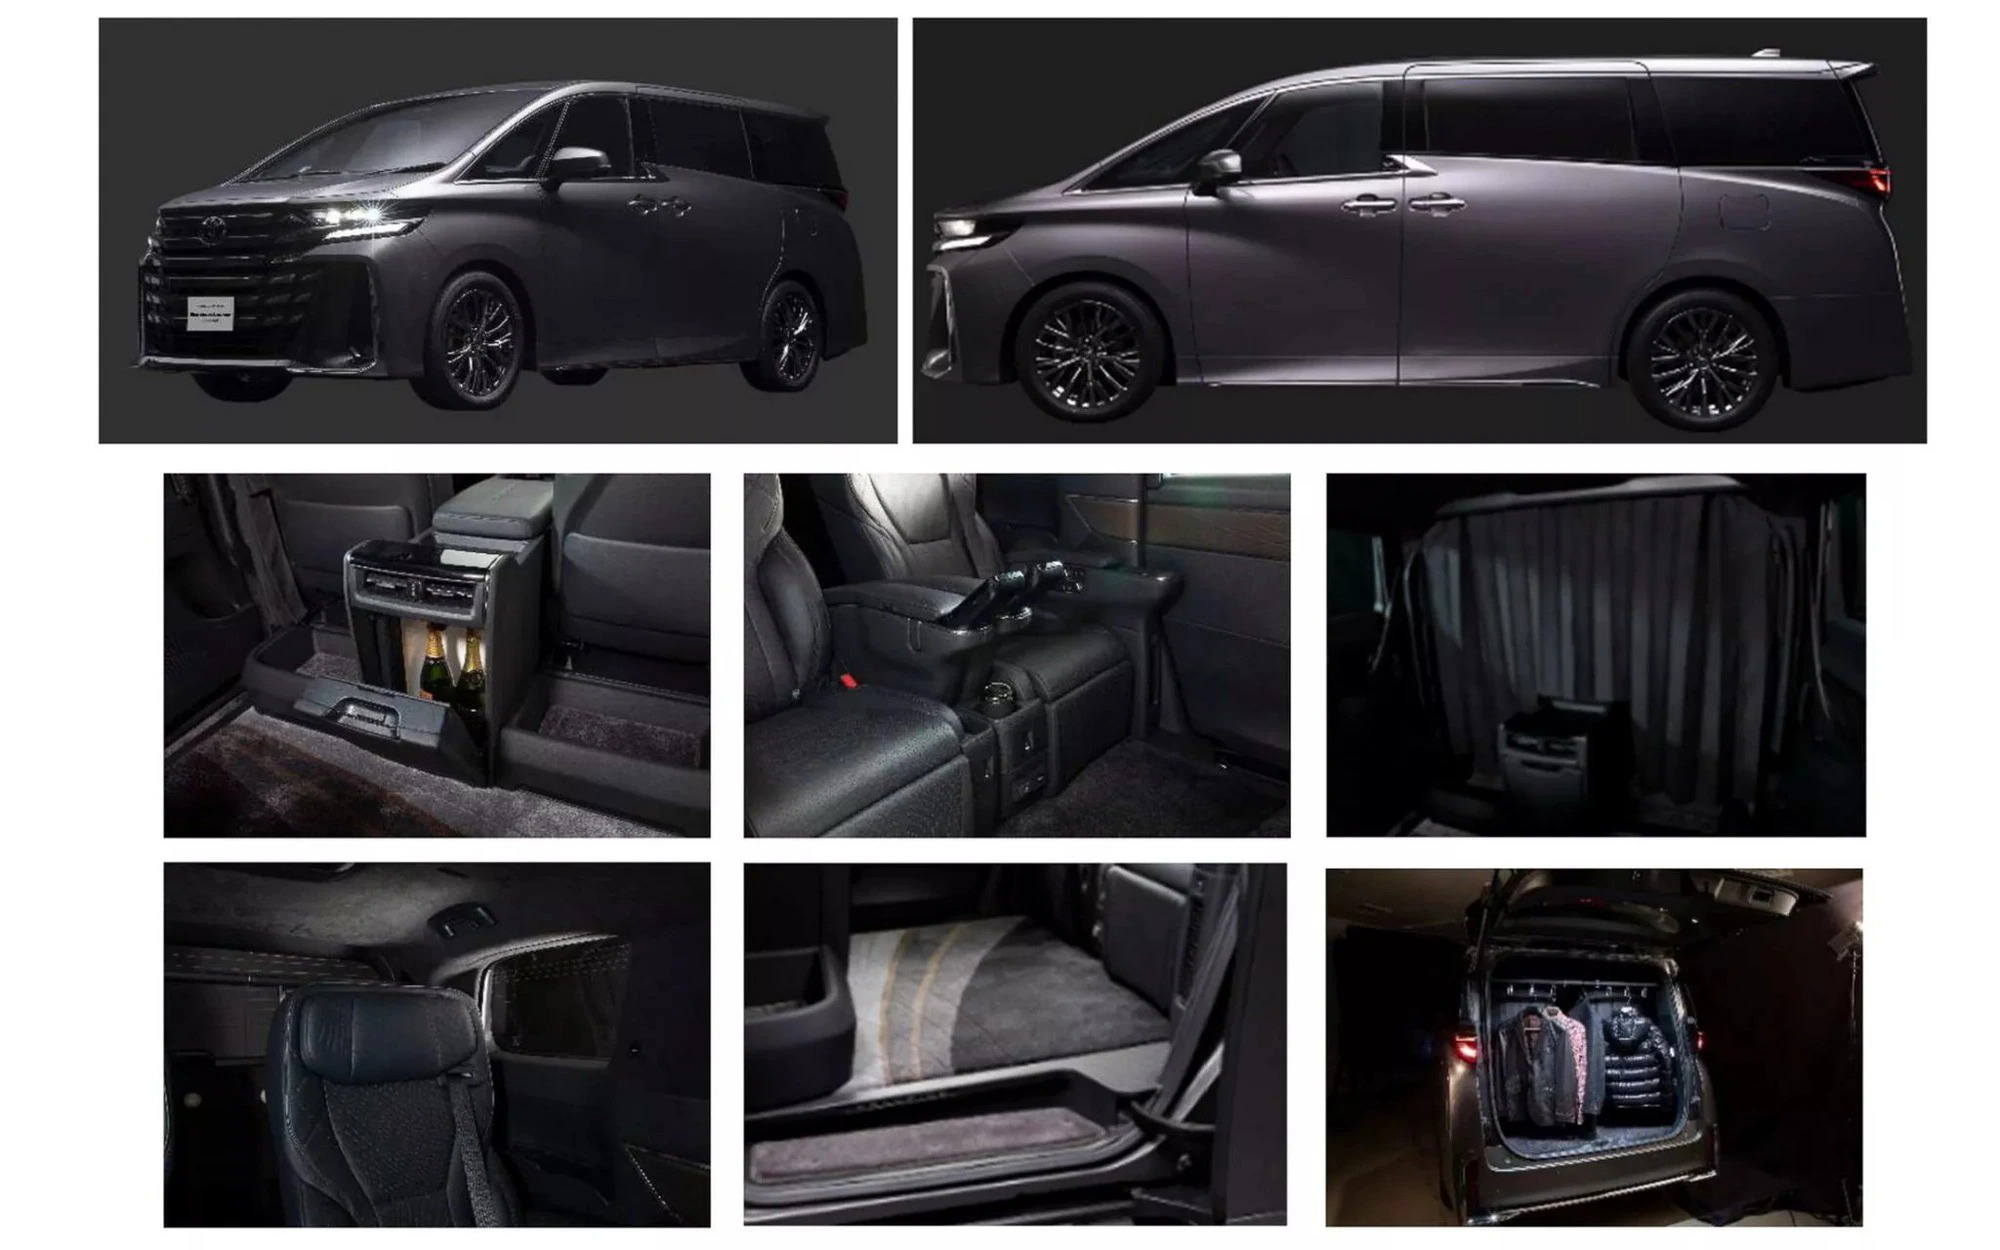 The Vellfire Spacious Lounge features handbags, a refrigerator, privacy curtains and clothes hangers in the passenger compartment in addition to the original frame - Photo: Toyota